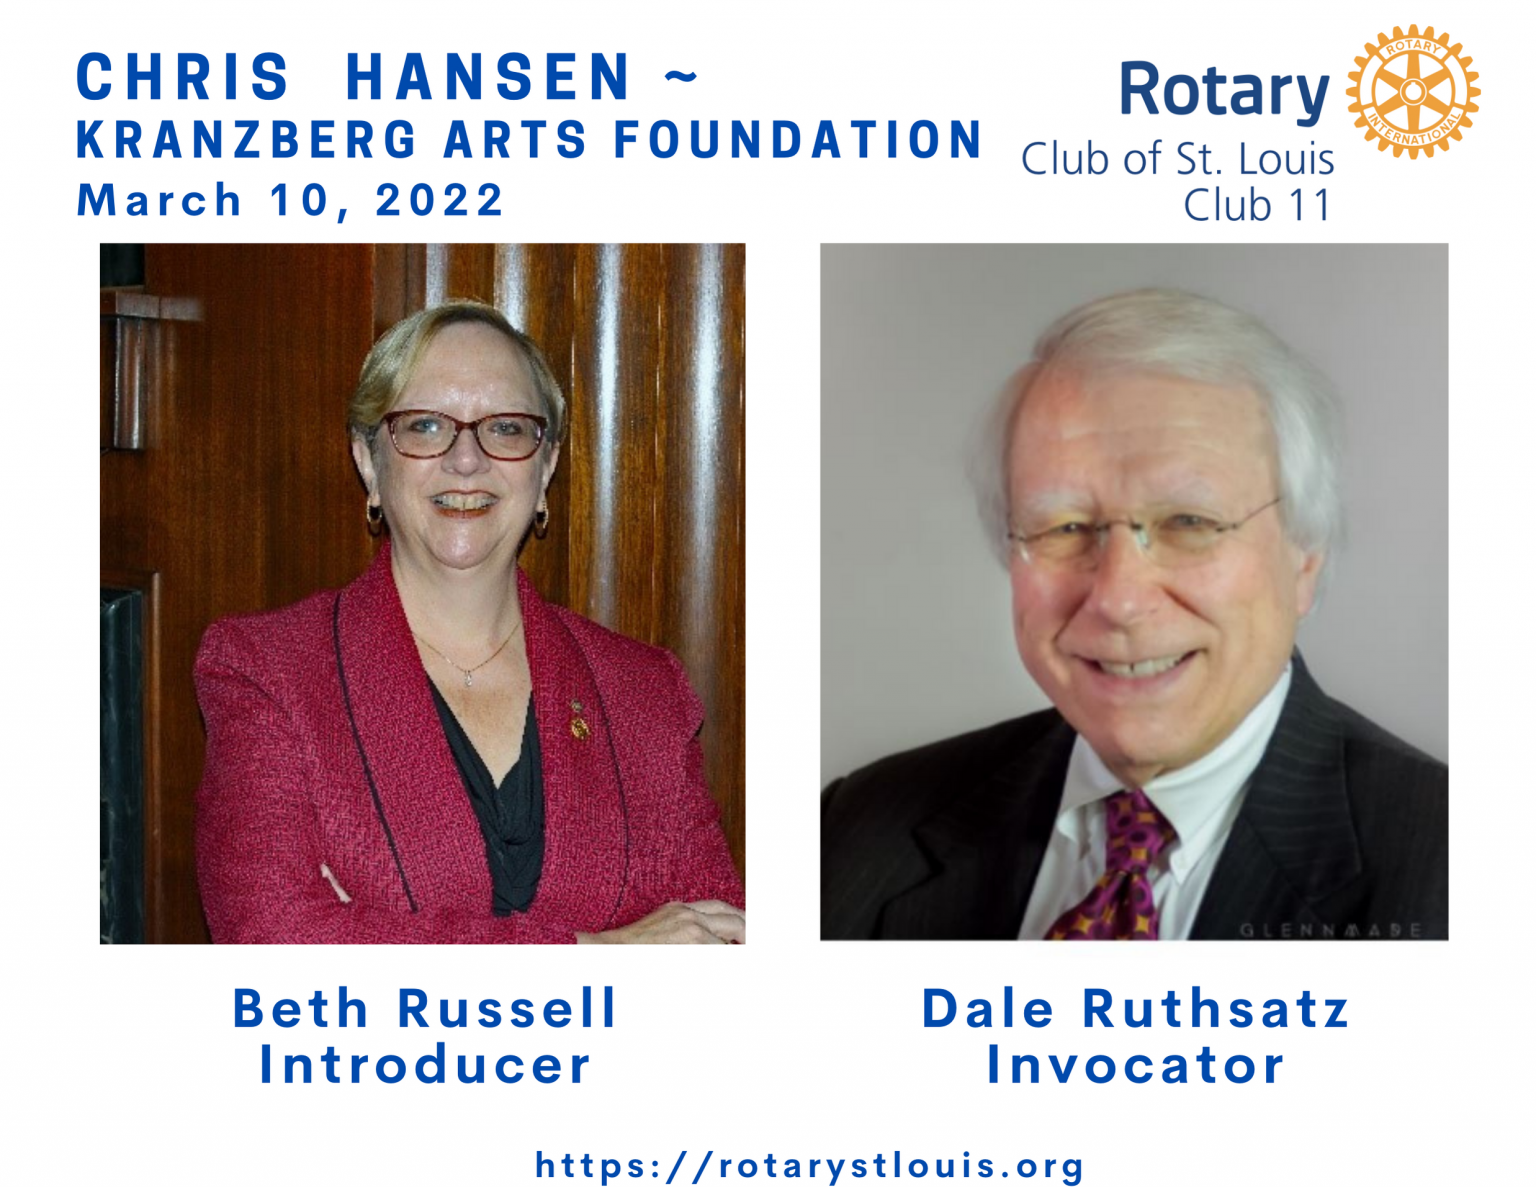 Beth Russell, Introducer & Dale Ruthsatz, Invocator for March 10, 2022 at St. Louis Rotary Club